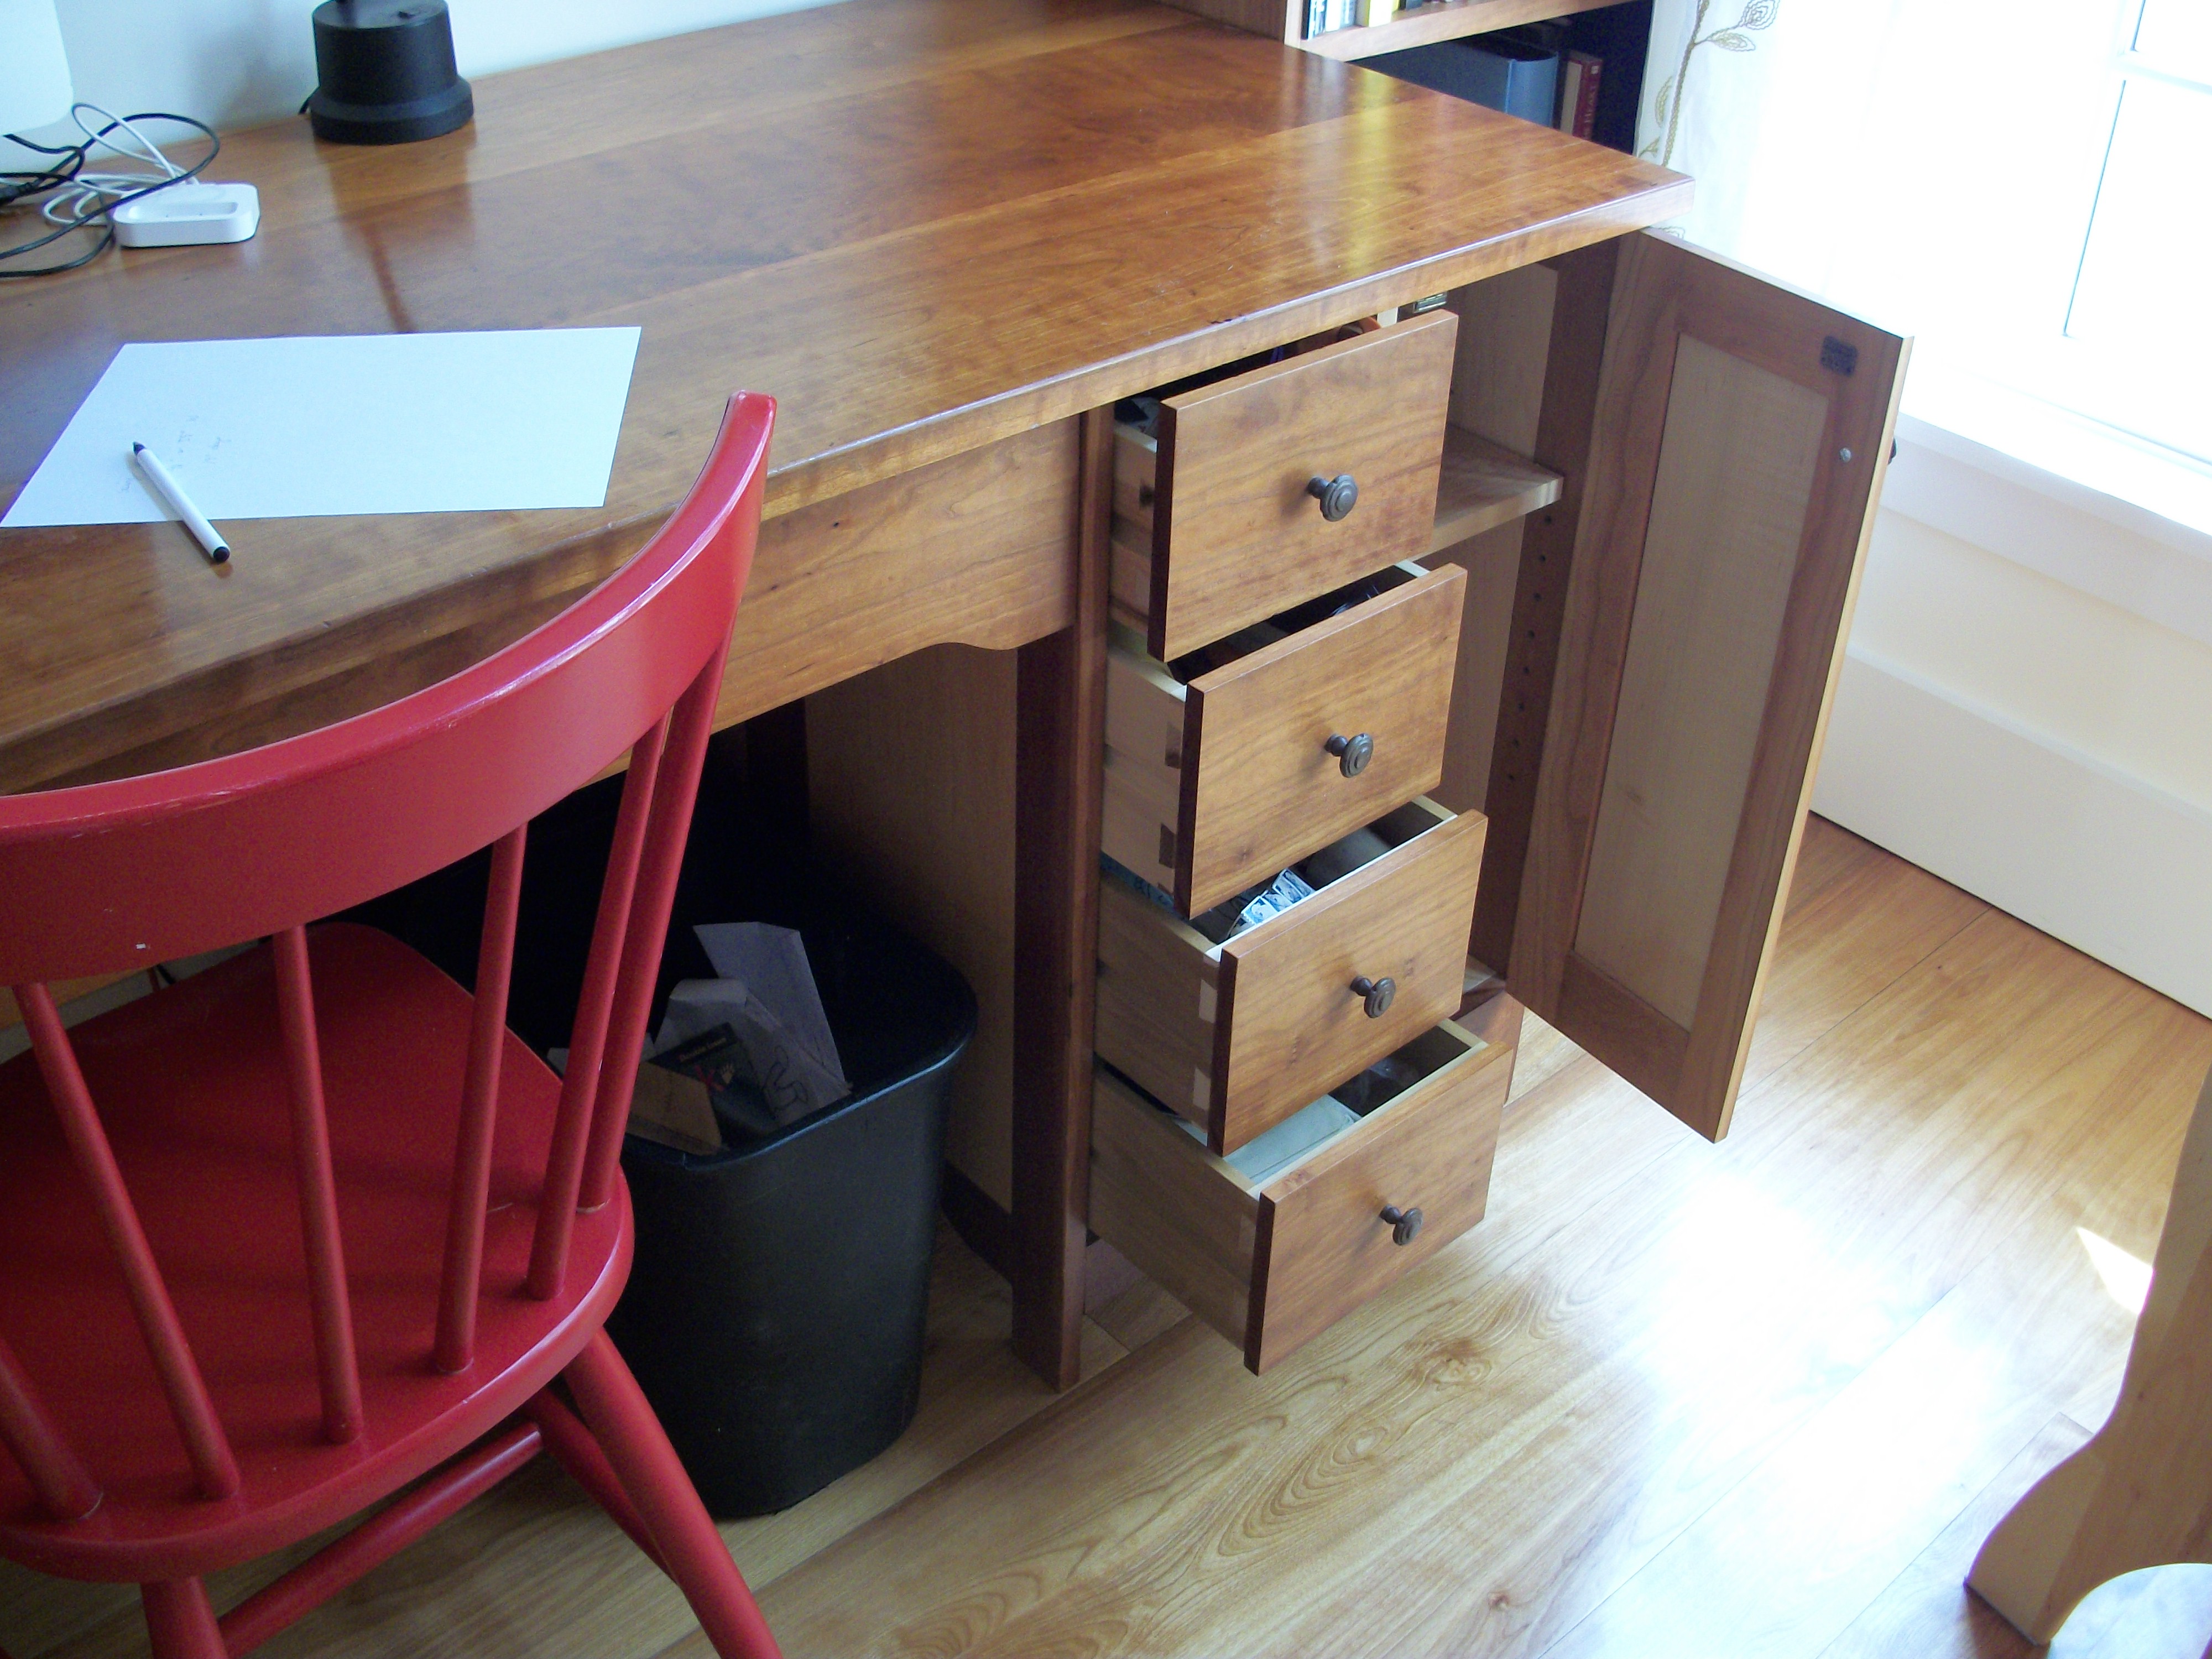 richs-desk-with-drawers-and-door-open